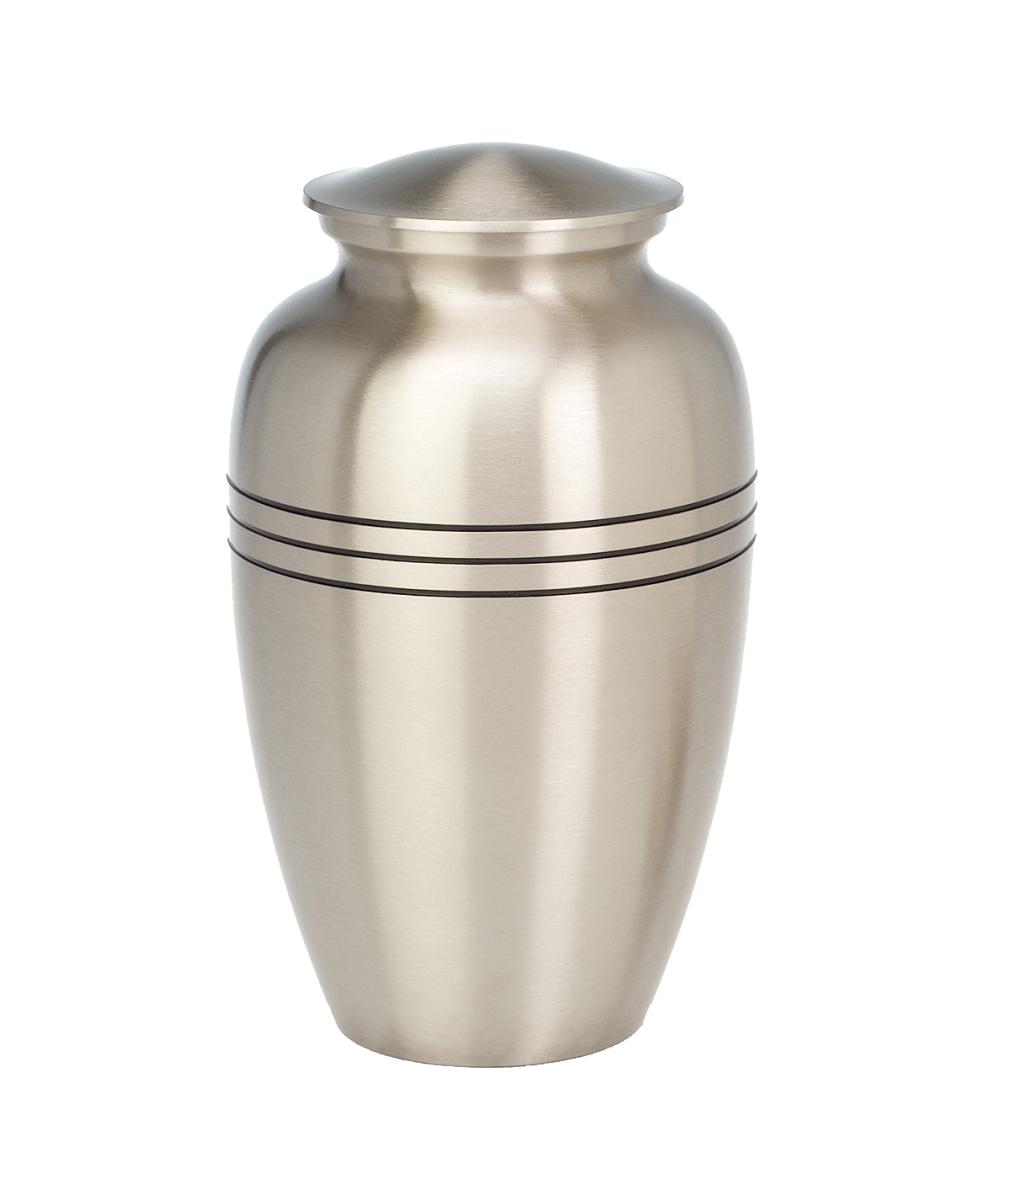 Large silver urn with three engraved ridges and lid